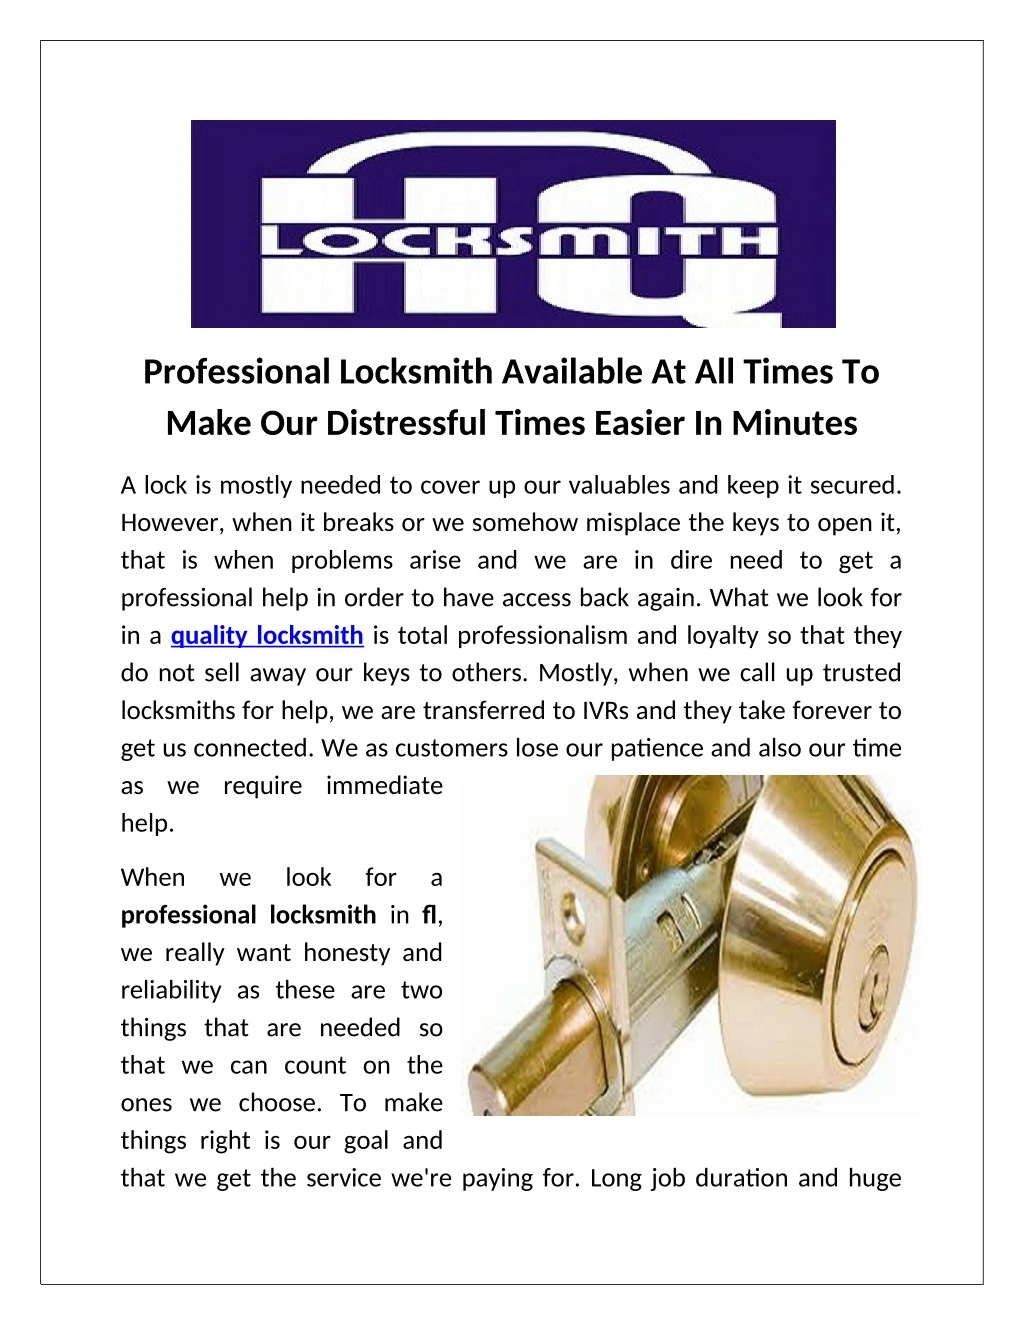 professional locksmith available at all times